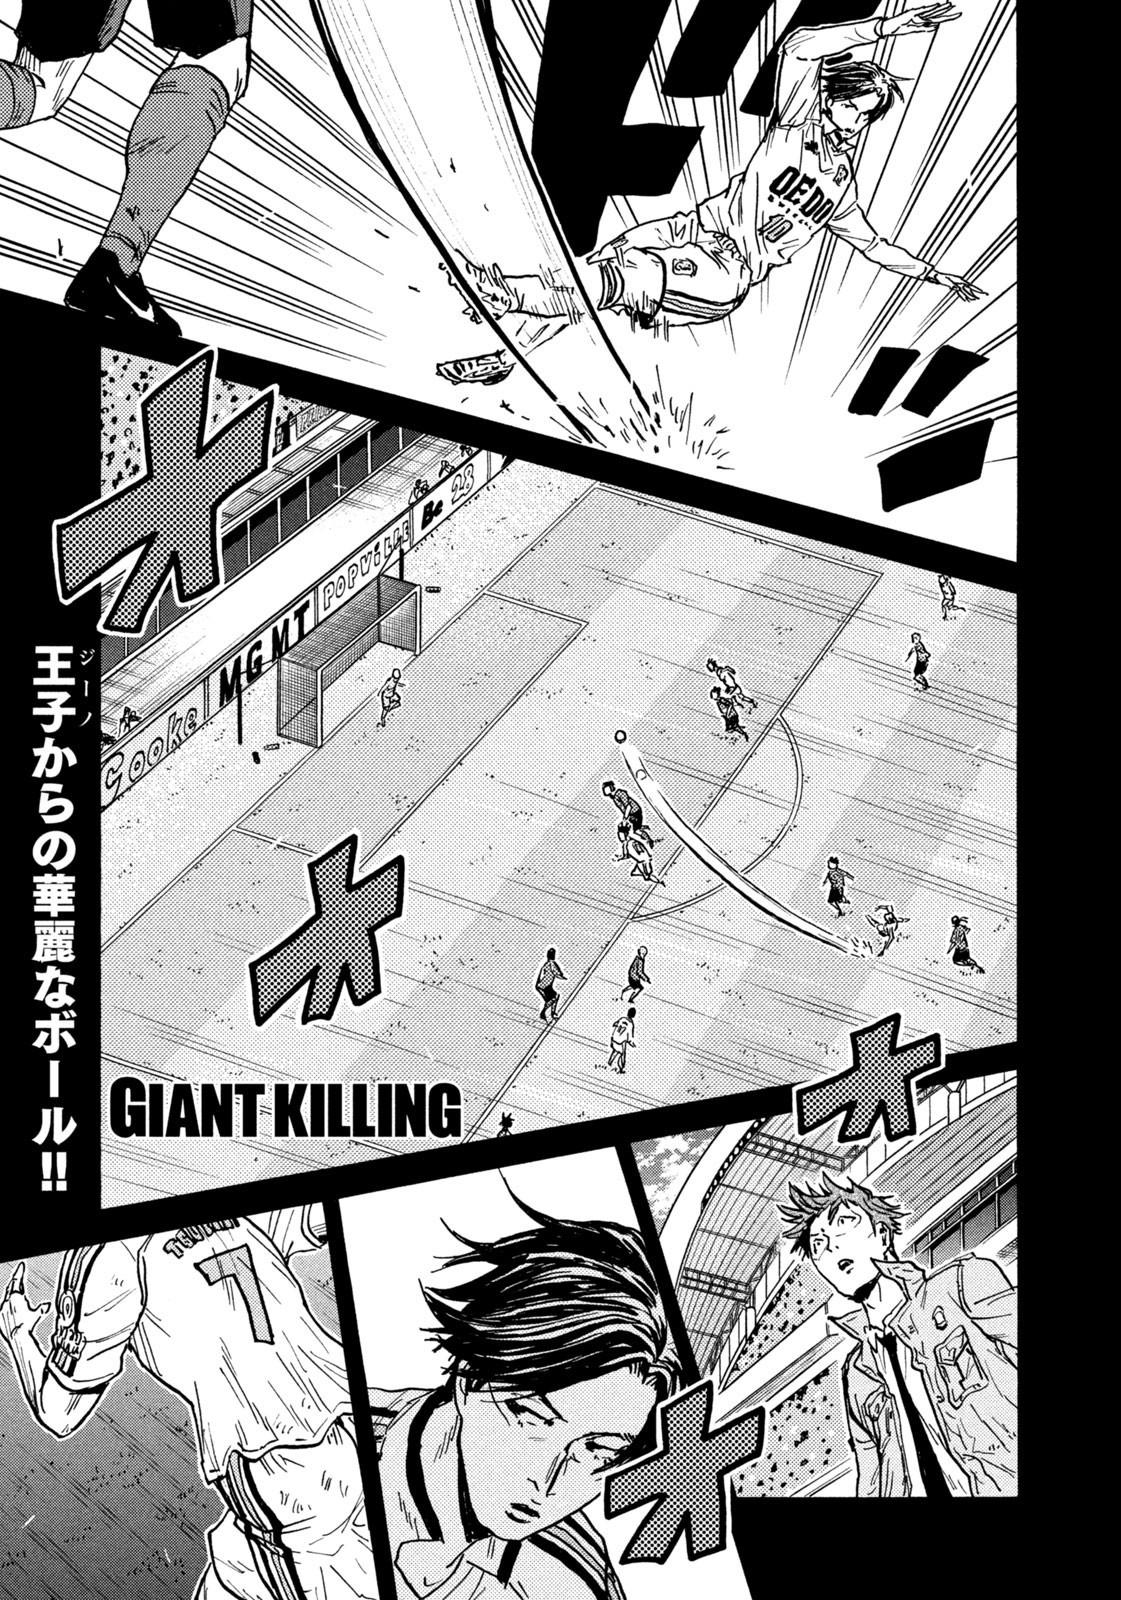 Giant Killing - Chapter 630 - Page 1